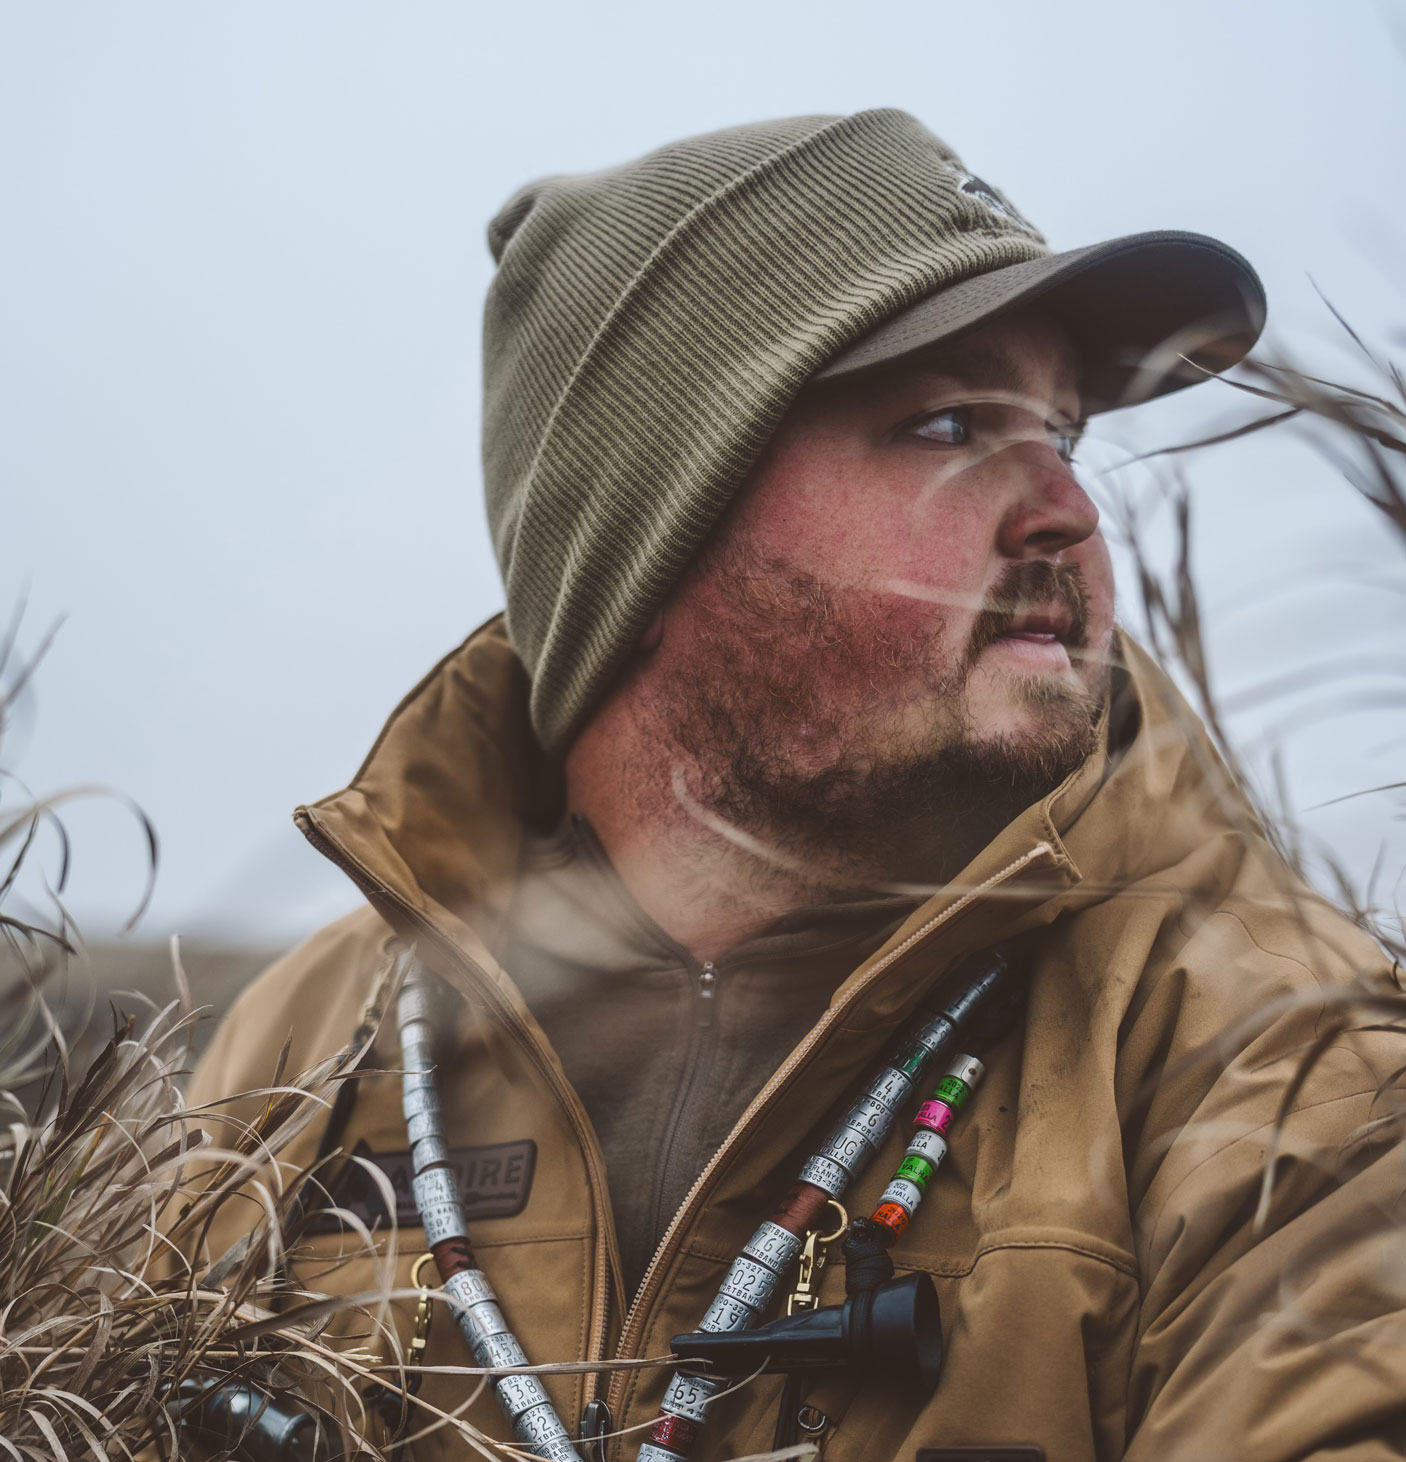 Blake McWilliams will be on stage at the Delta Waterfowl Duck Hunters Expo